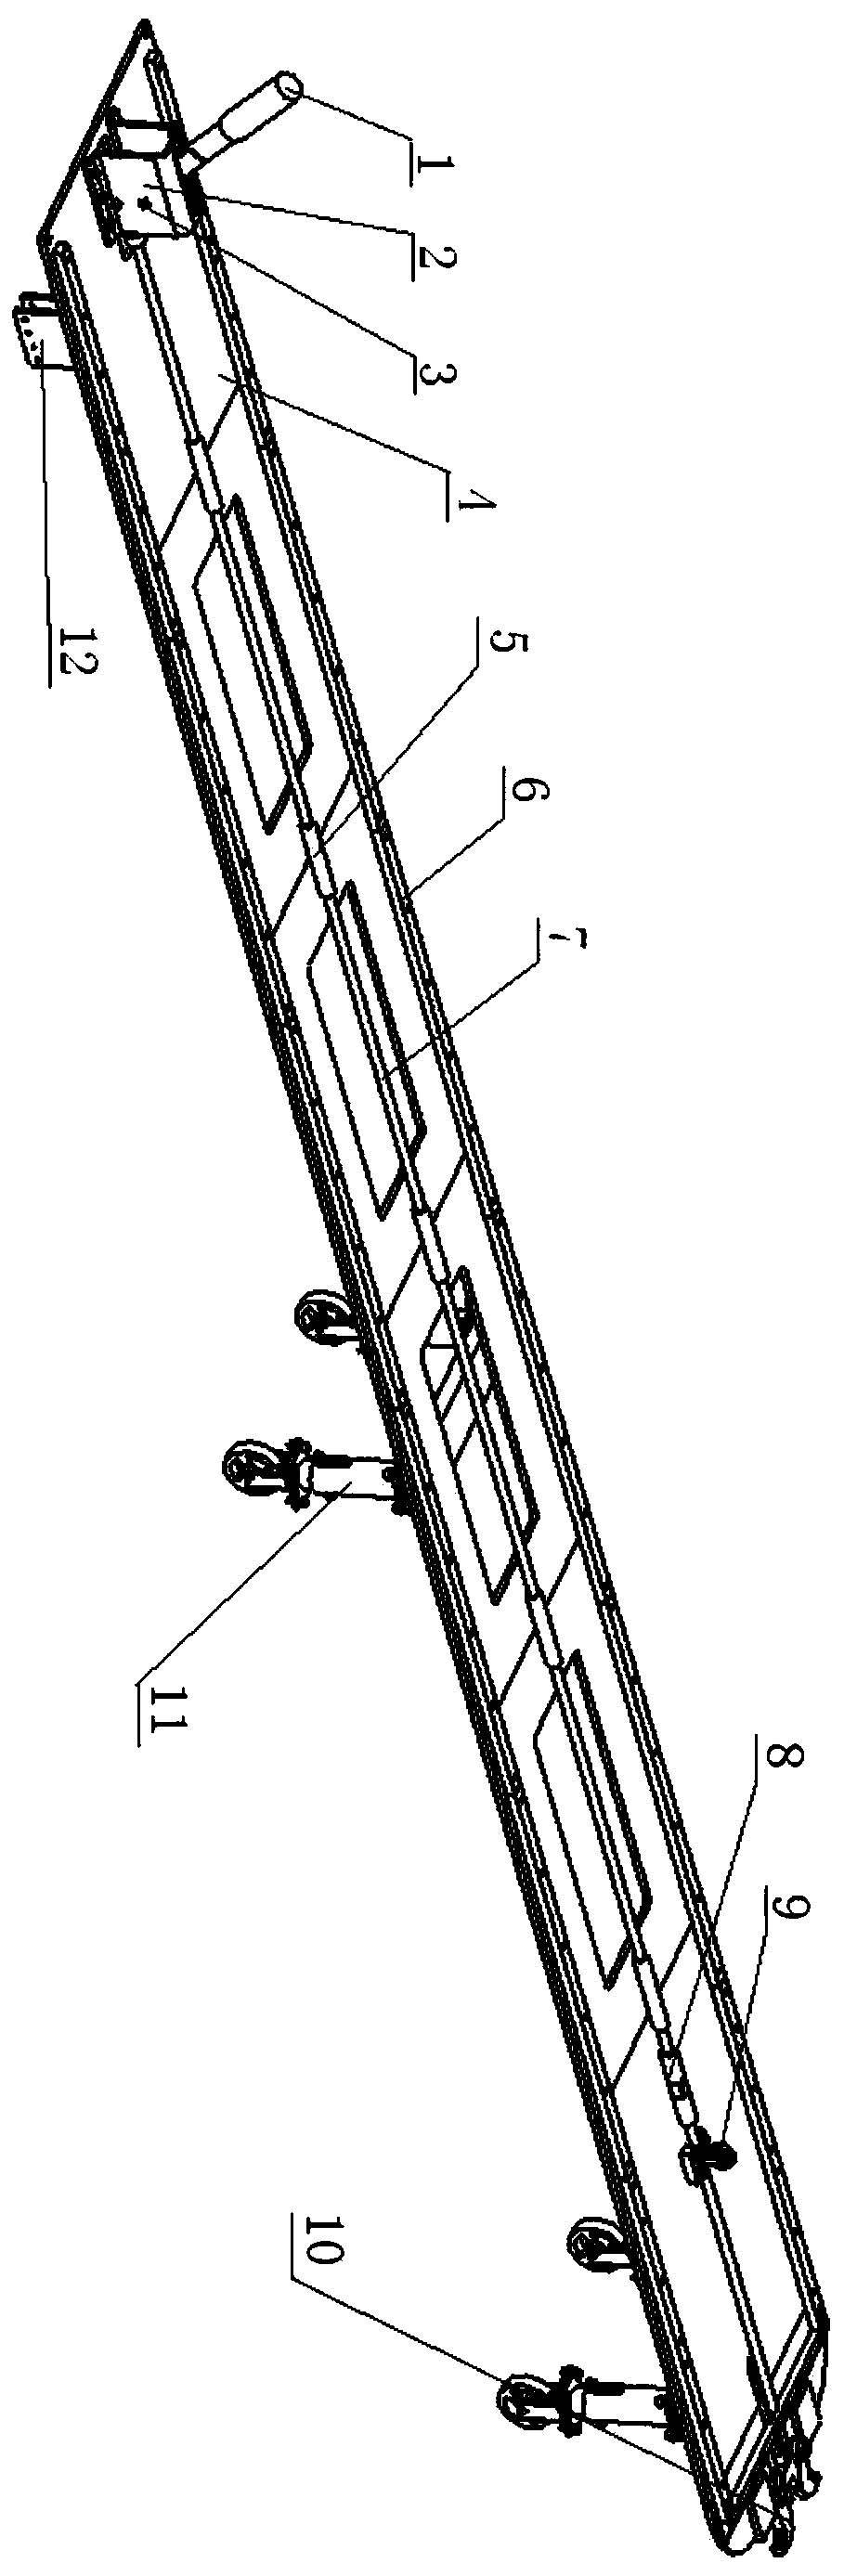 A mine-catching and carrying mechanism support device used in torpedo loading and unloading equipment